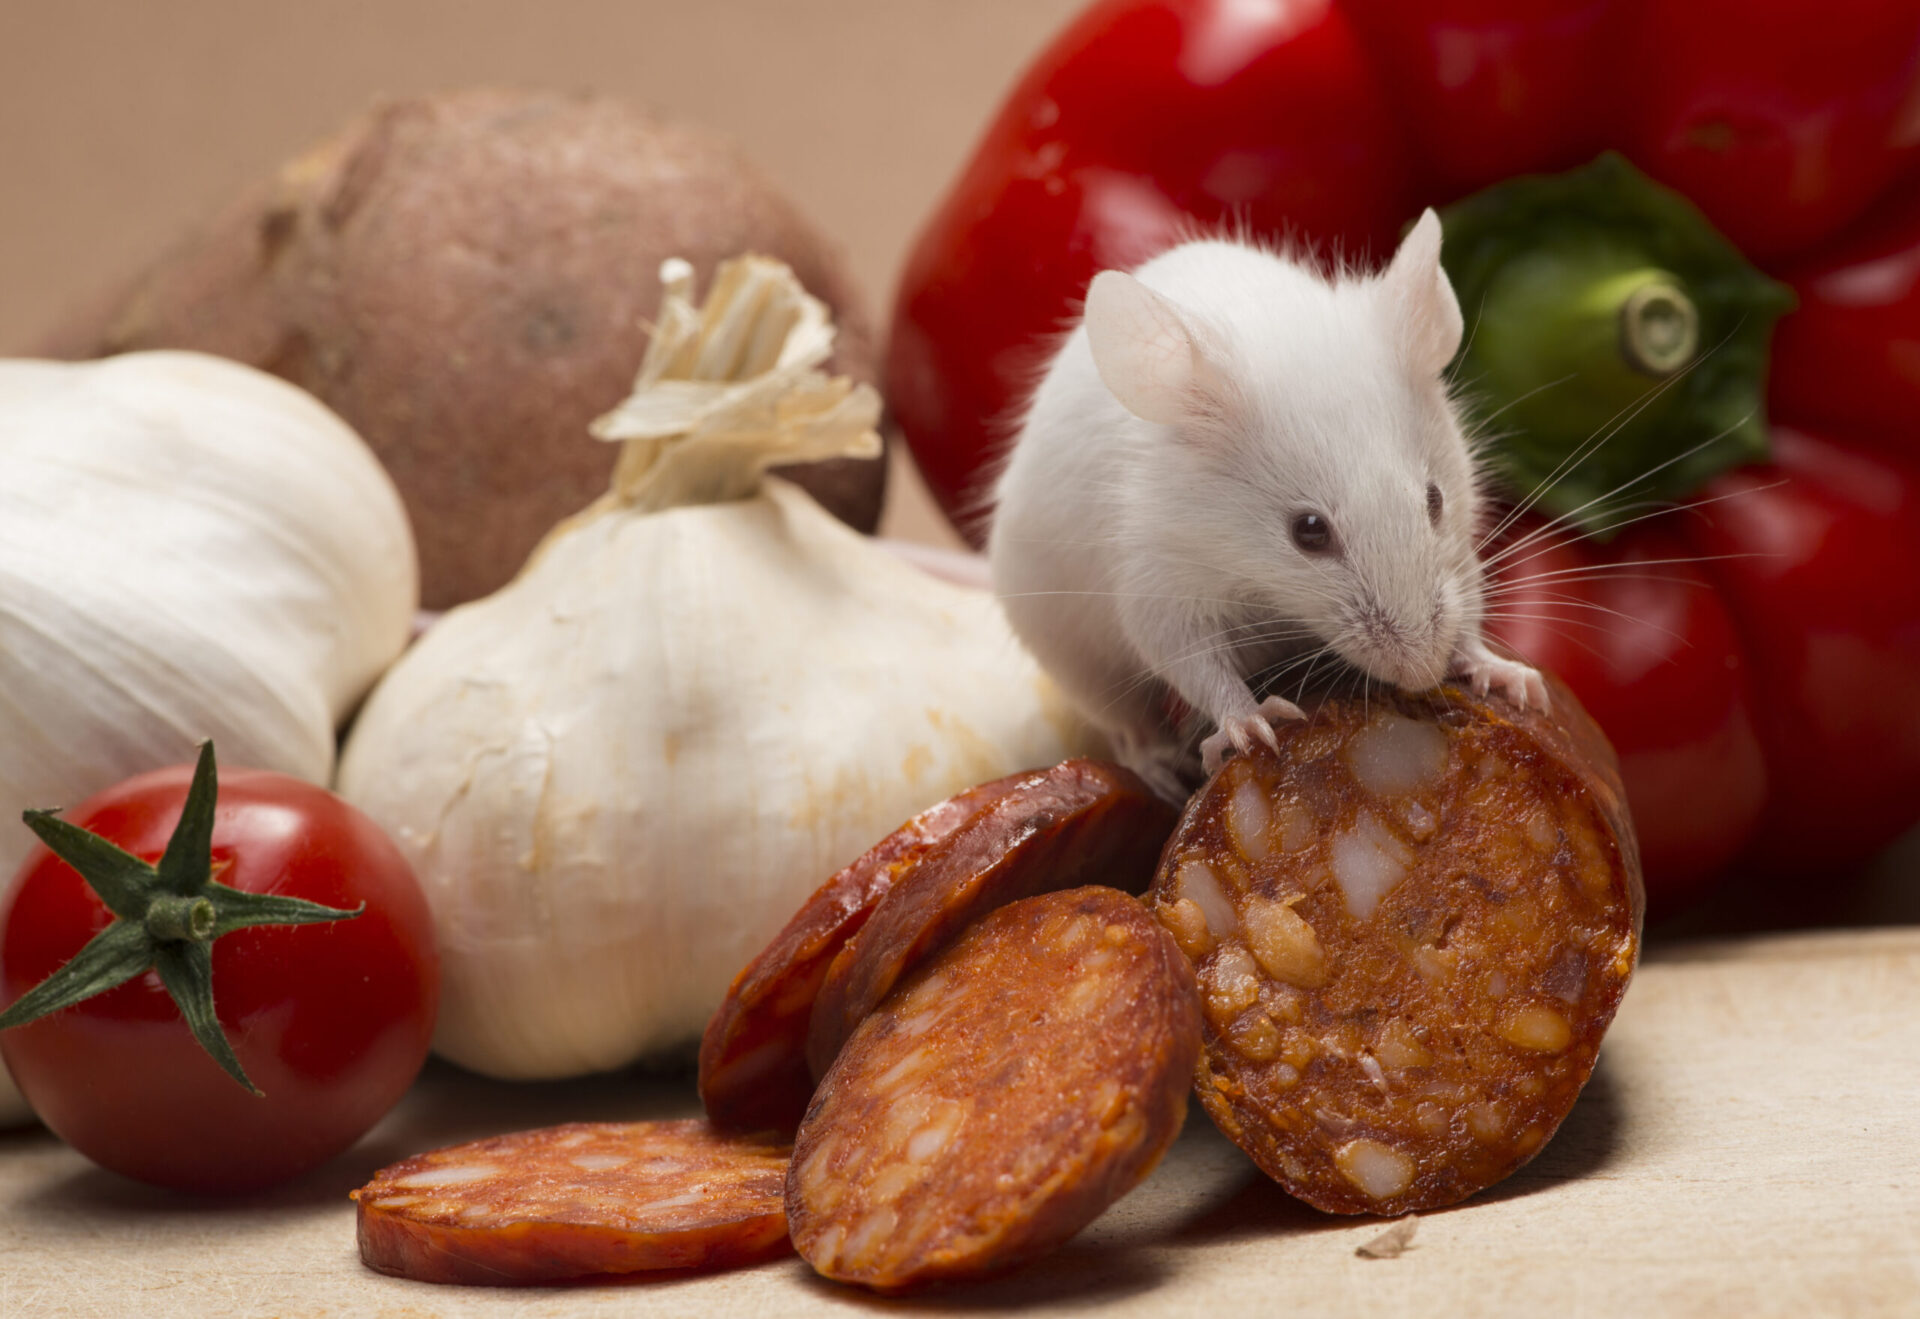 white mouse with pink feet and brown eyes eating pepperoni near red tomatoes and white onions